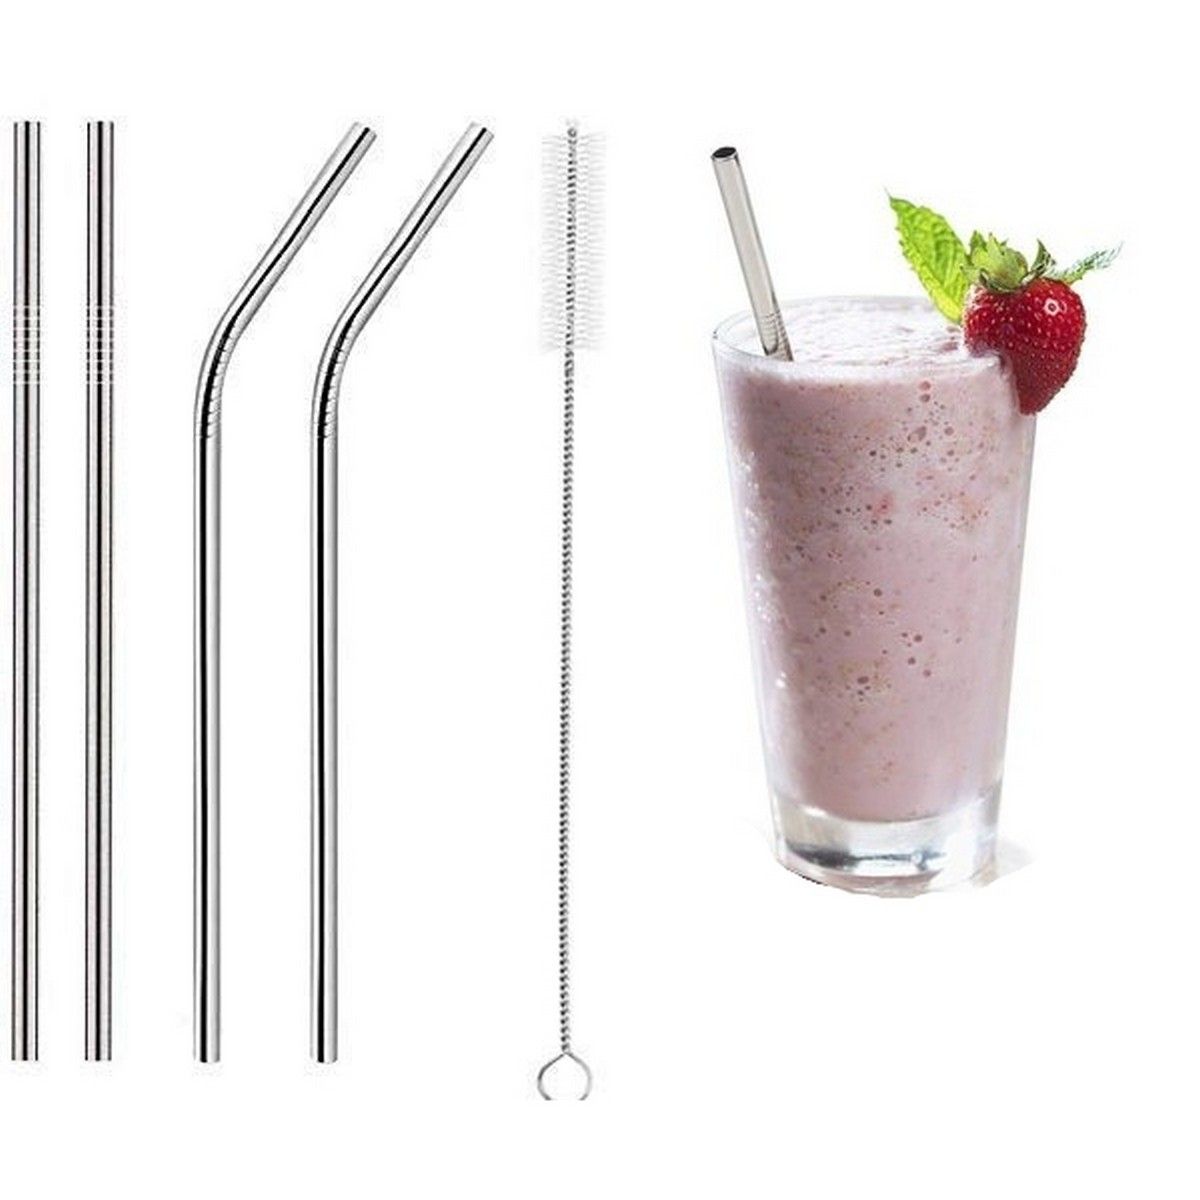 https://www.oshi.pk/images/variation/pack-of-5---stainless-steel-reusable-drinking-straws-with-cleaning-brush-metal-straws-23607-421.jpg